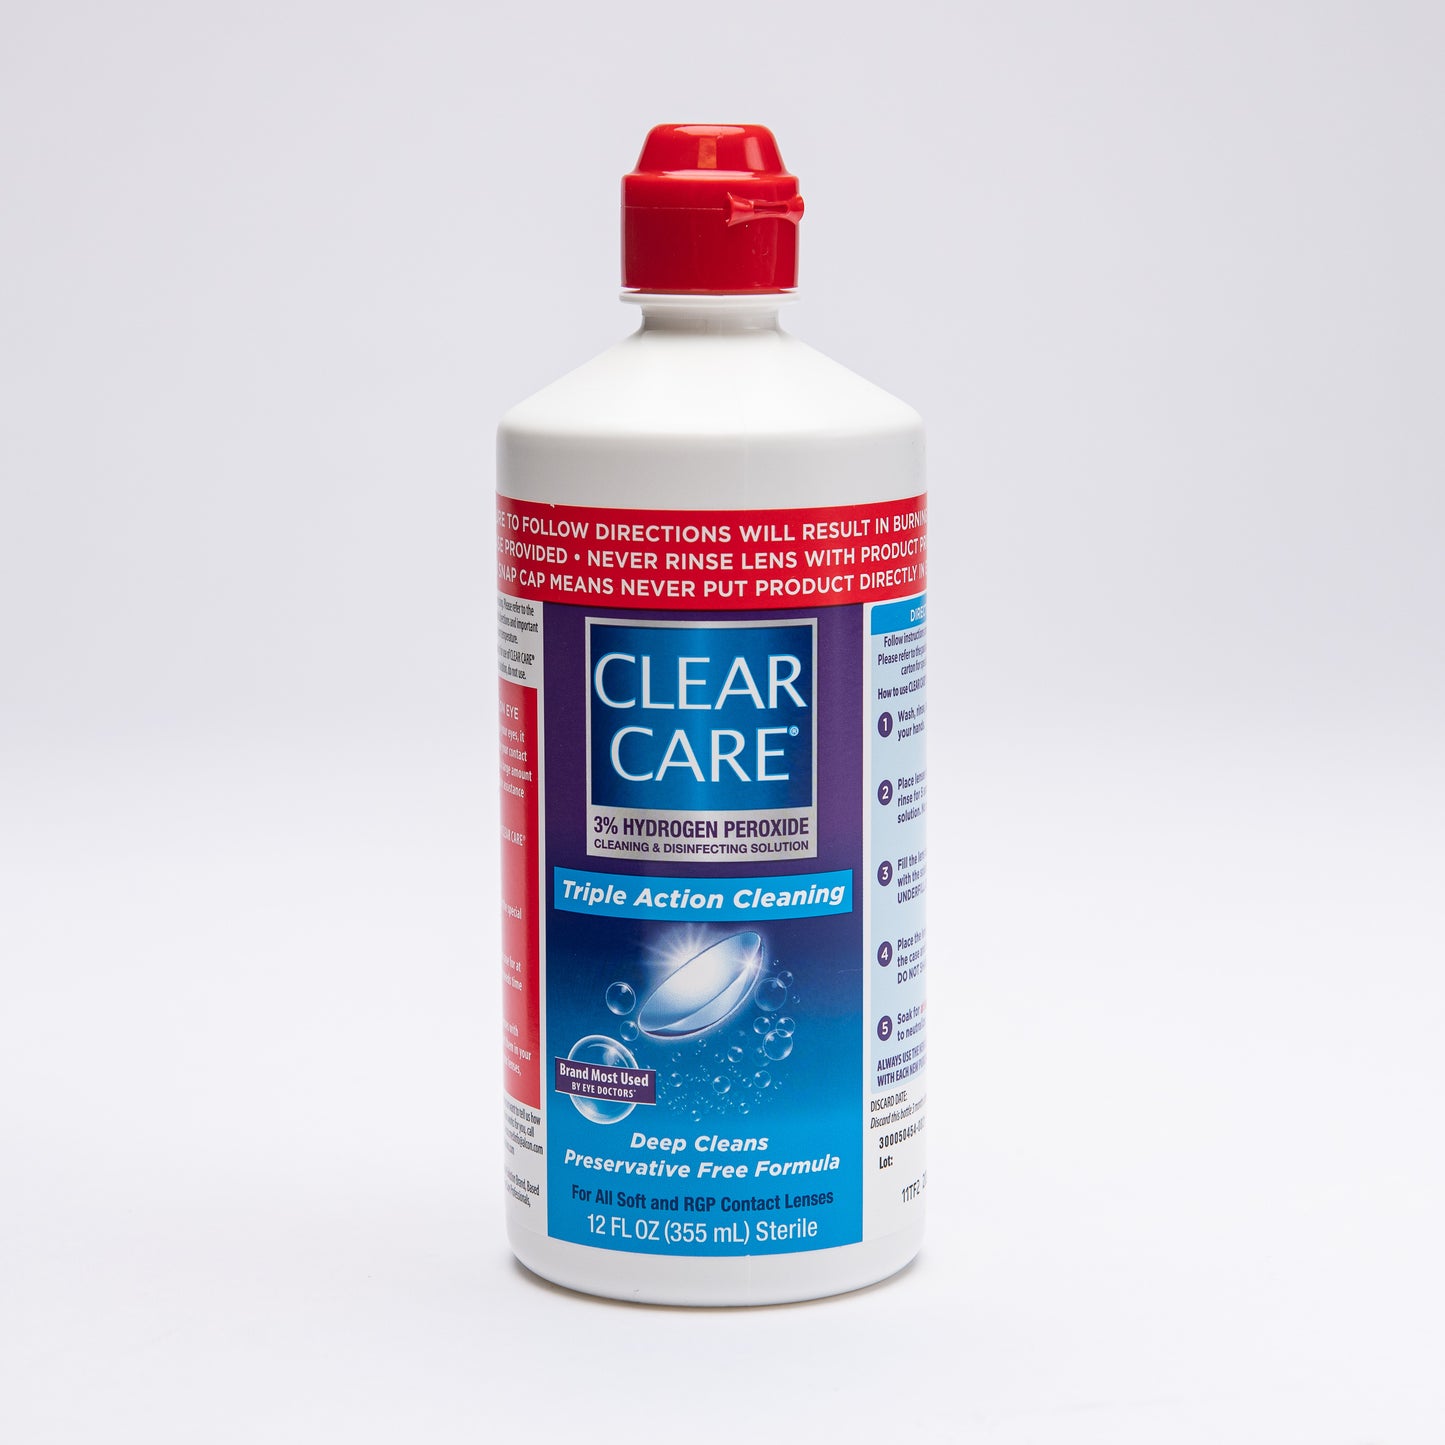 Clear Care 3% Hydrogen Peroxide Triple Action Cleaning Solution & Lens Case